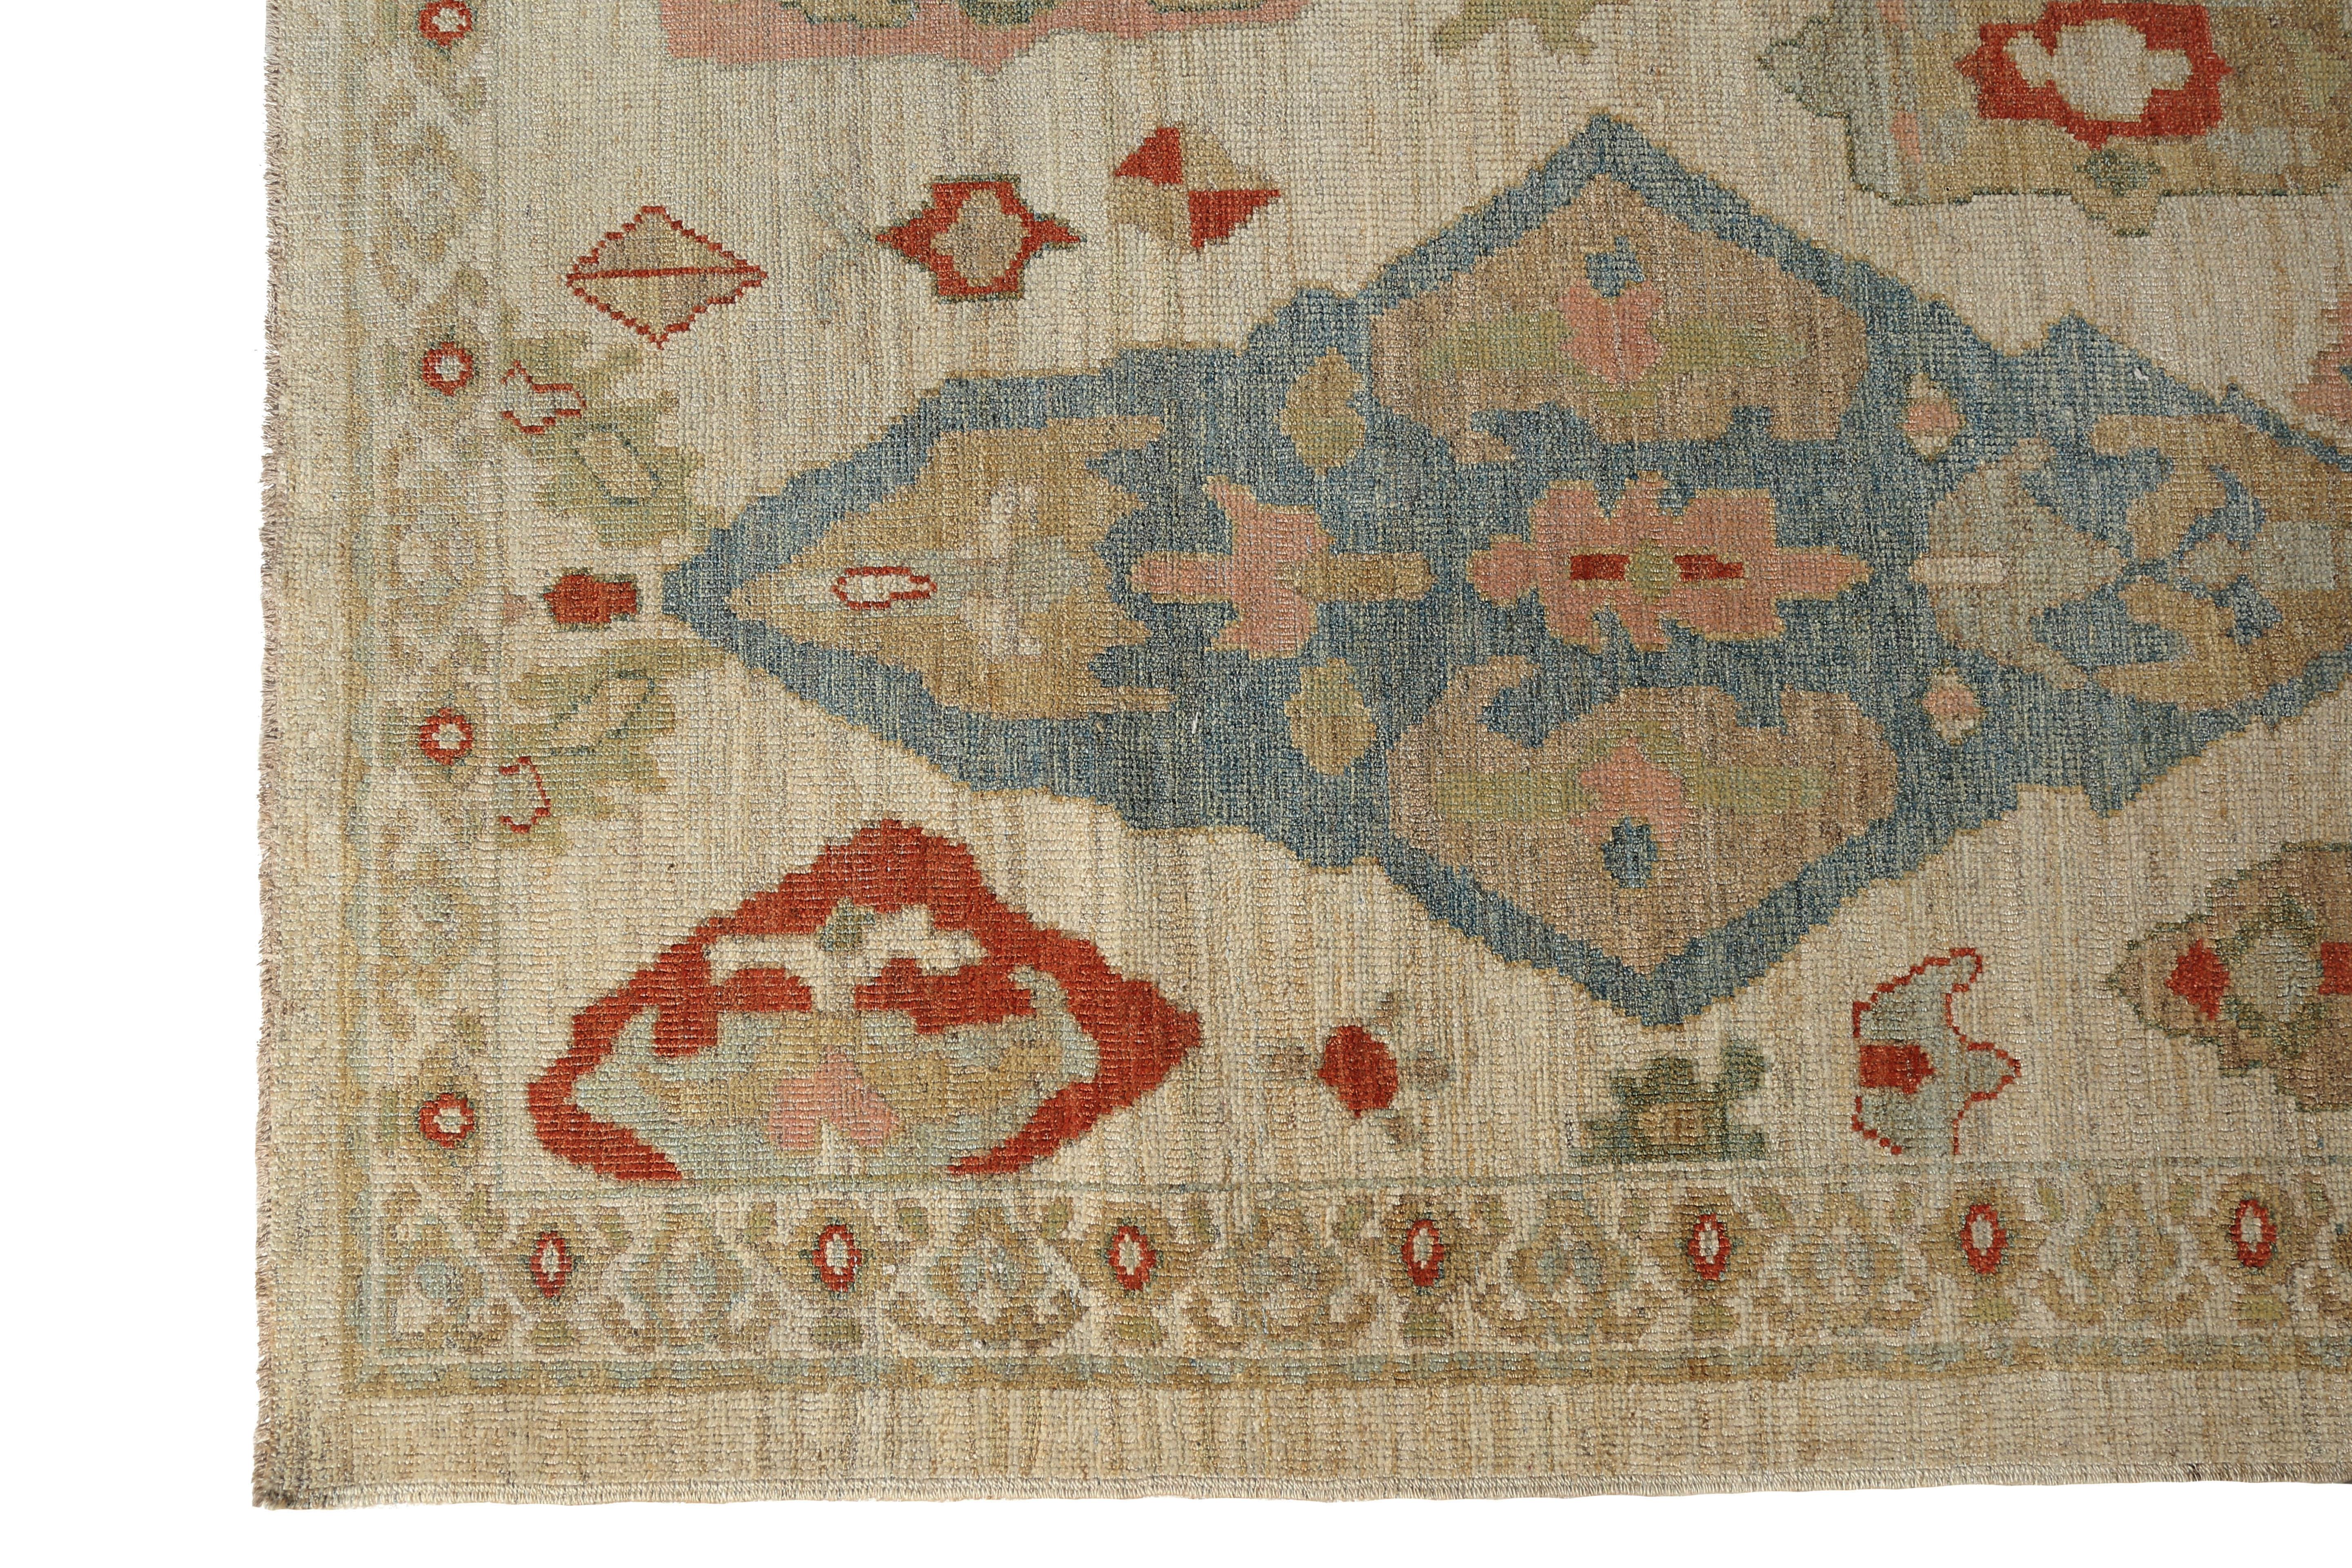 Introducing our exquisite handmade Turkish Sultanabad runner rug! This stunning piece features a beige background with a minimal border, allowing the vibrant colors in the design to truly shine. The intricate pattern showcases a beautiful array of